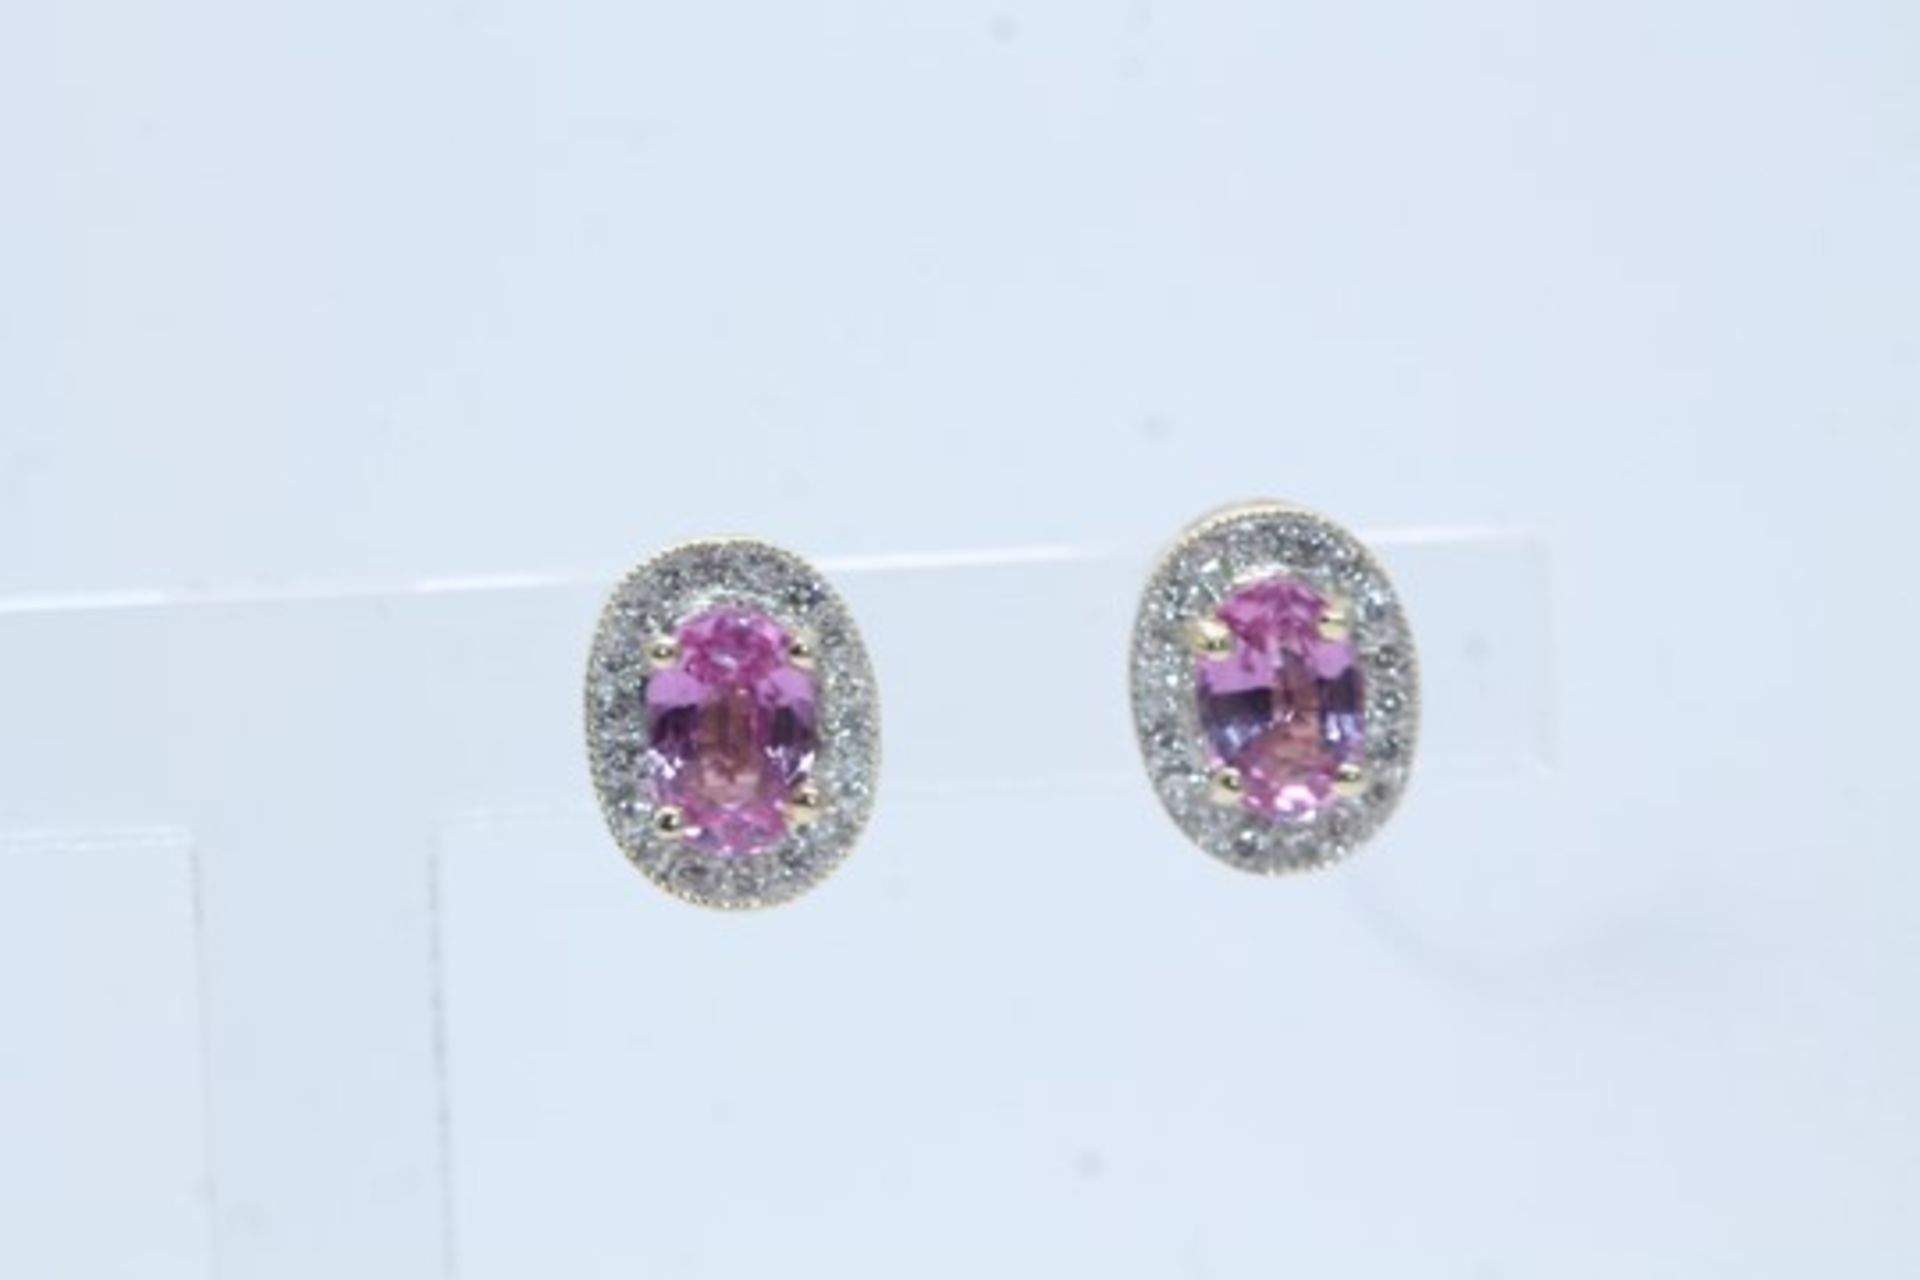 9ct Yellow Gold, Natural Pink Sapphire And Diamond Earrings, Includes AGI Insurance Certificate